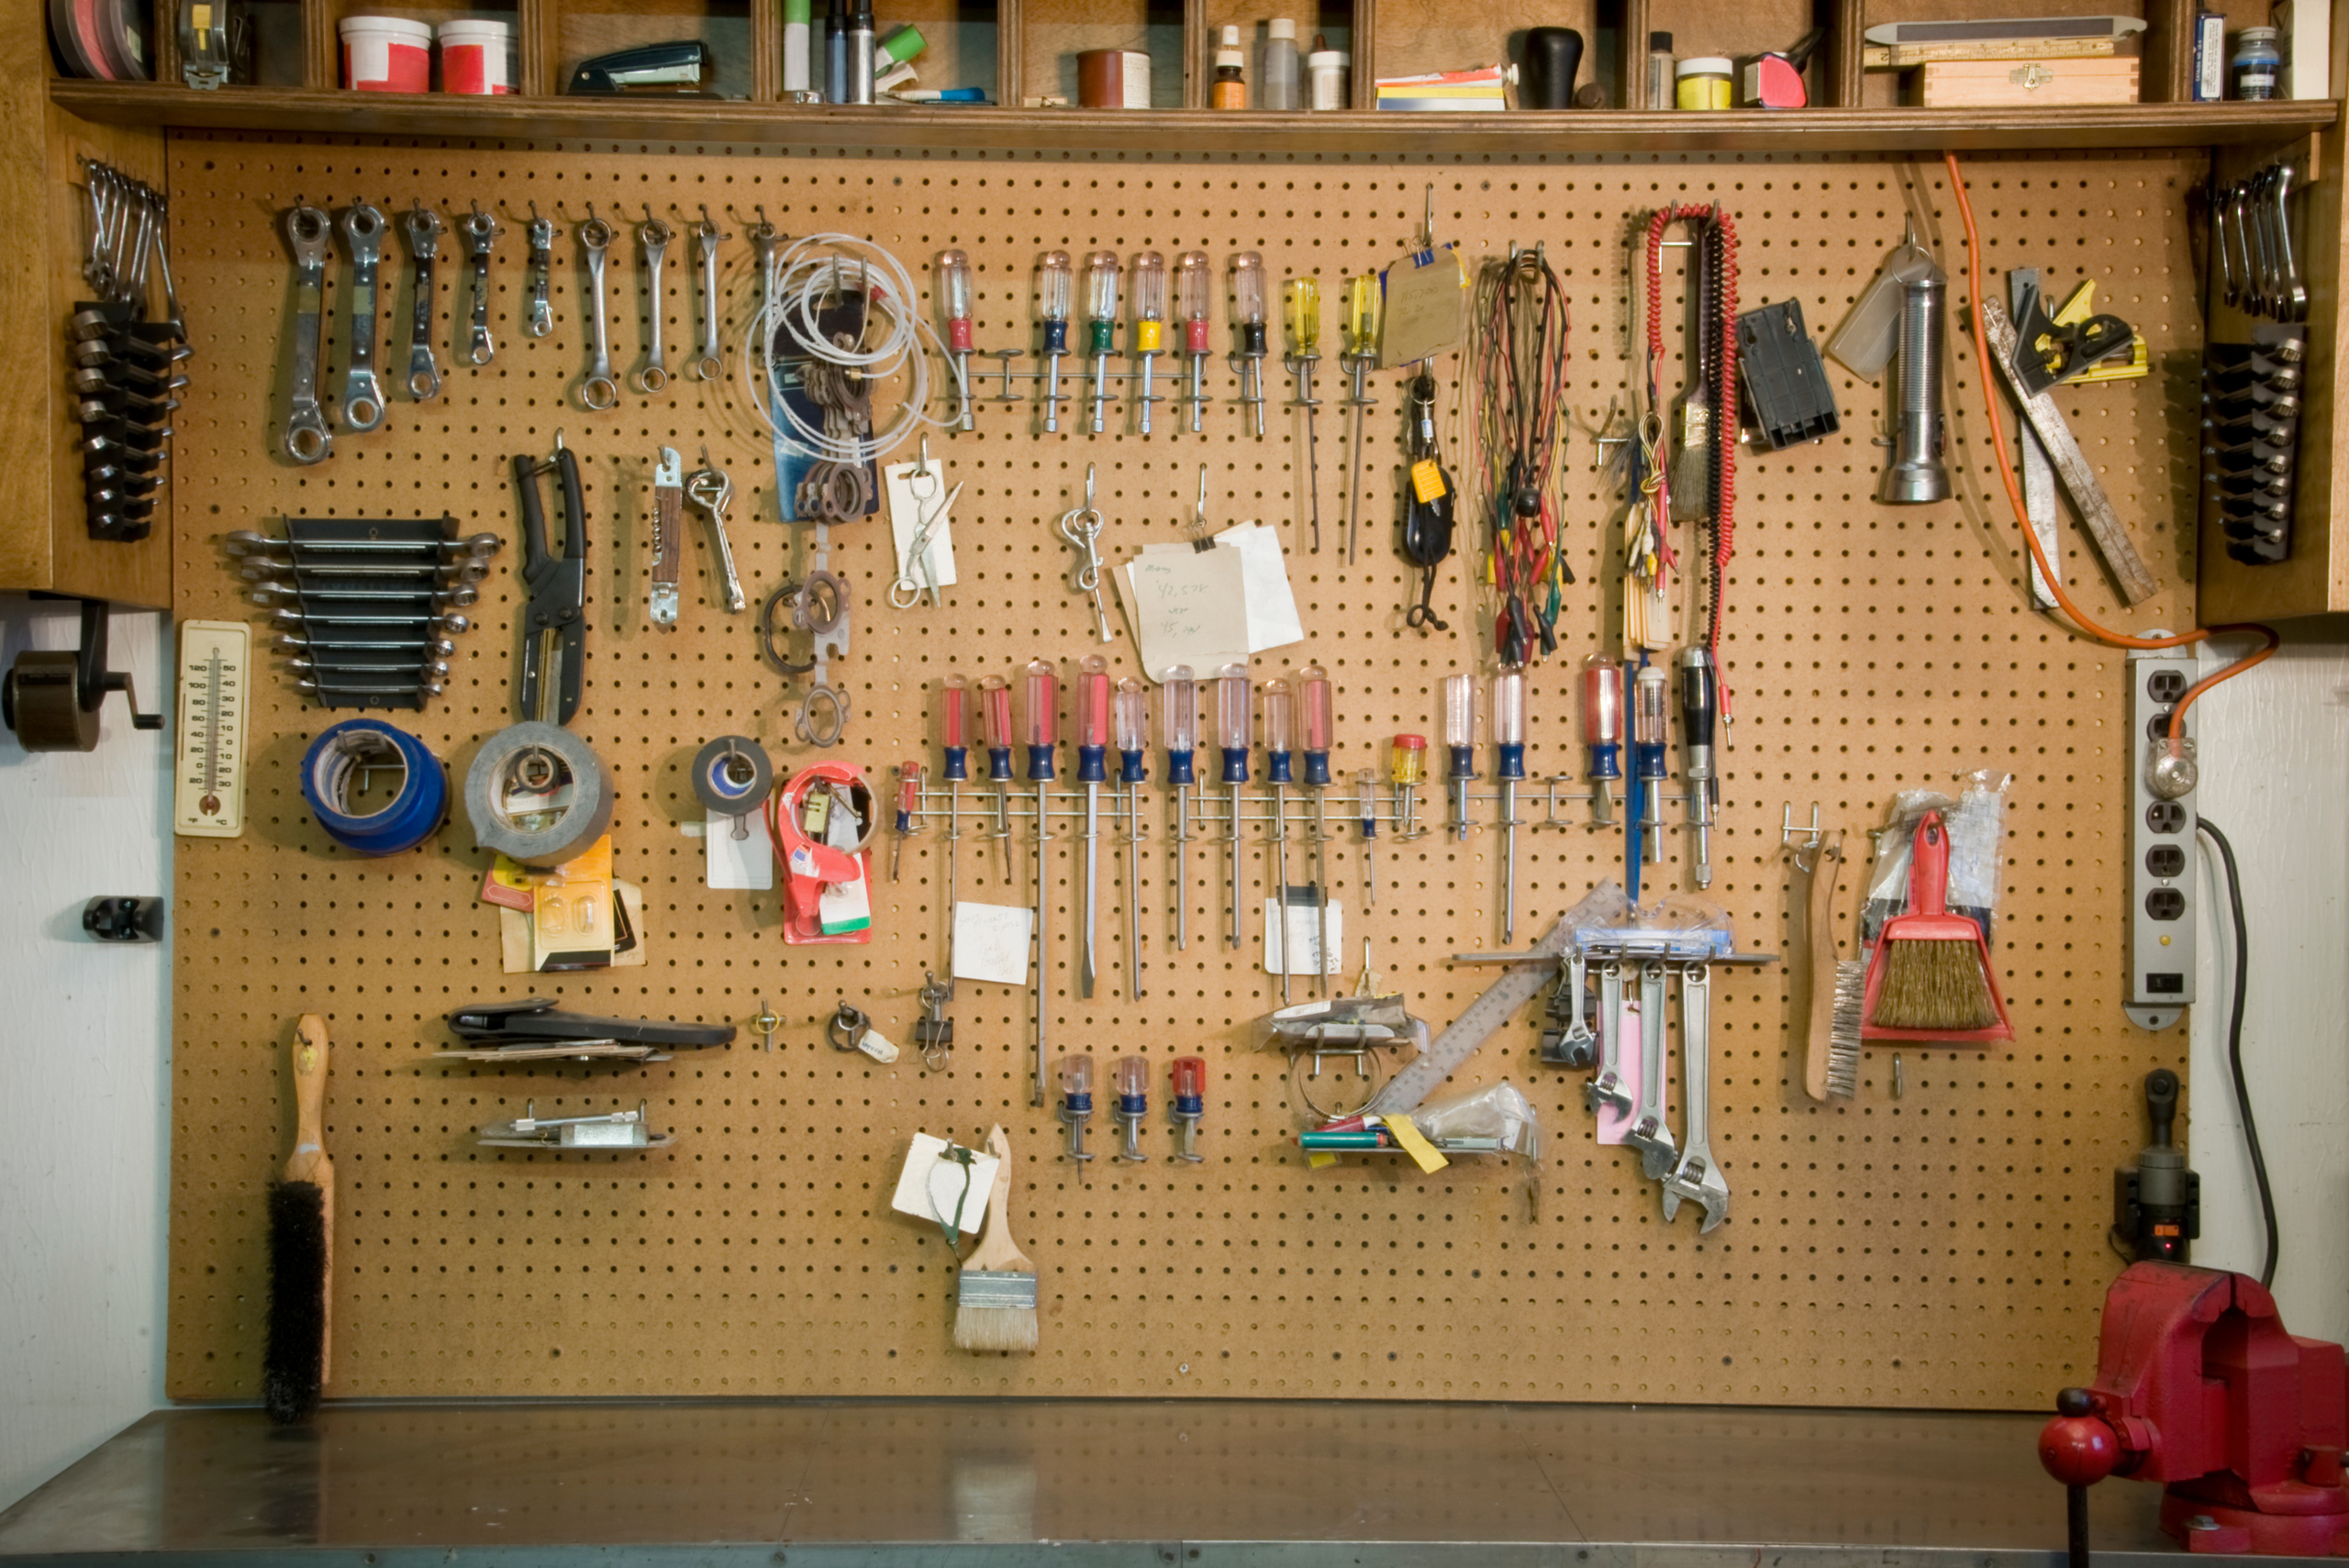 Pegboard with an assortment of tools and a shelf up top.